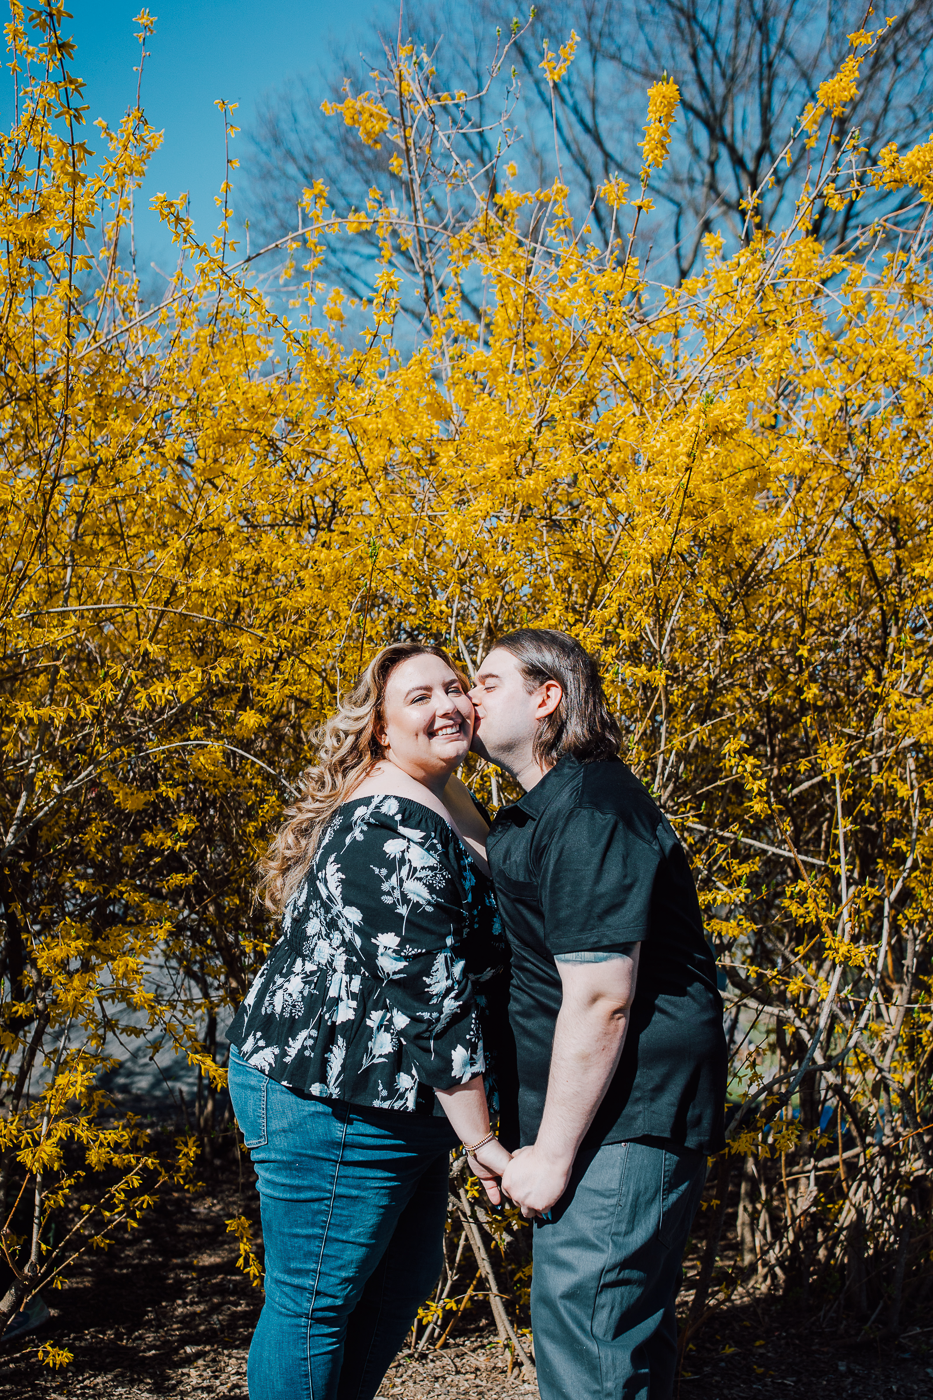  man kisses his fiance on the cheek surrounded by forsythia in Central Park in spring 